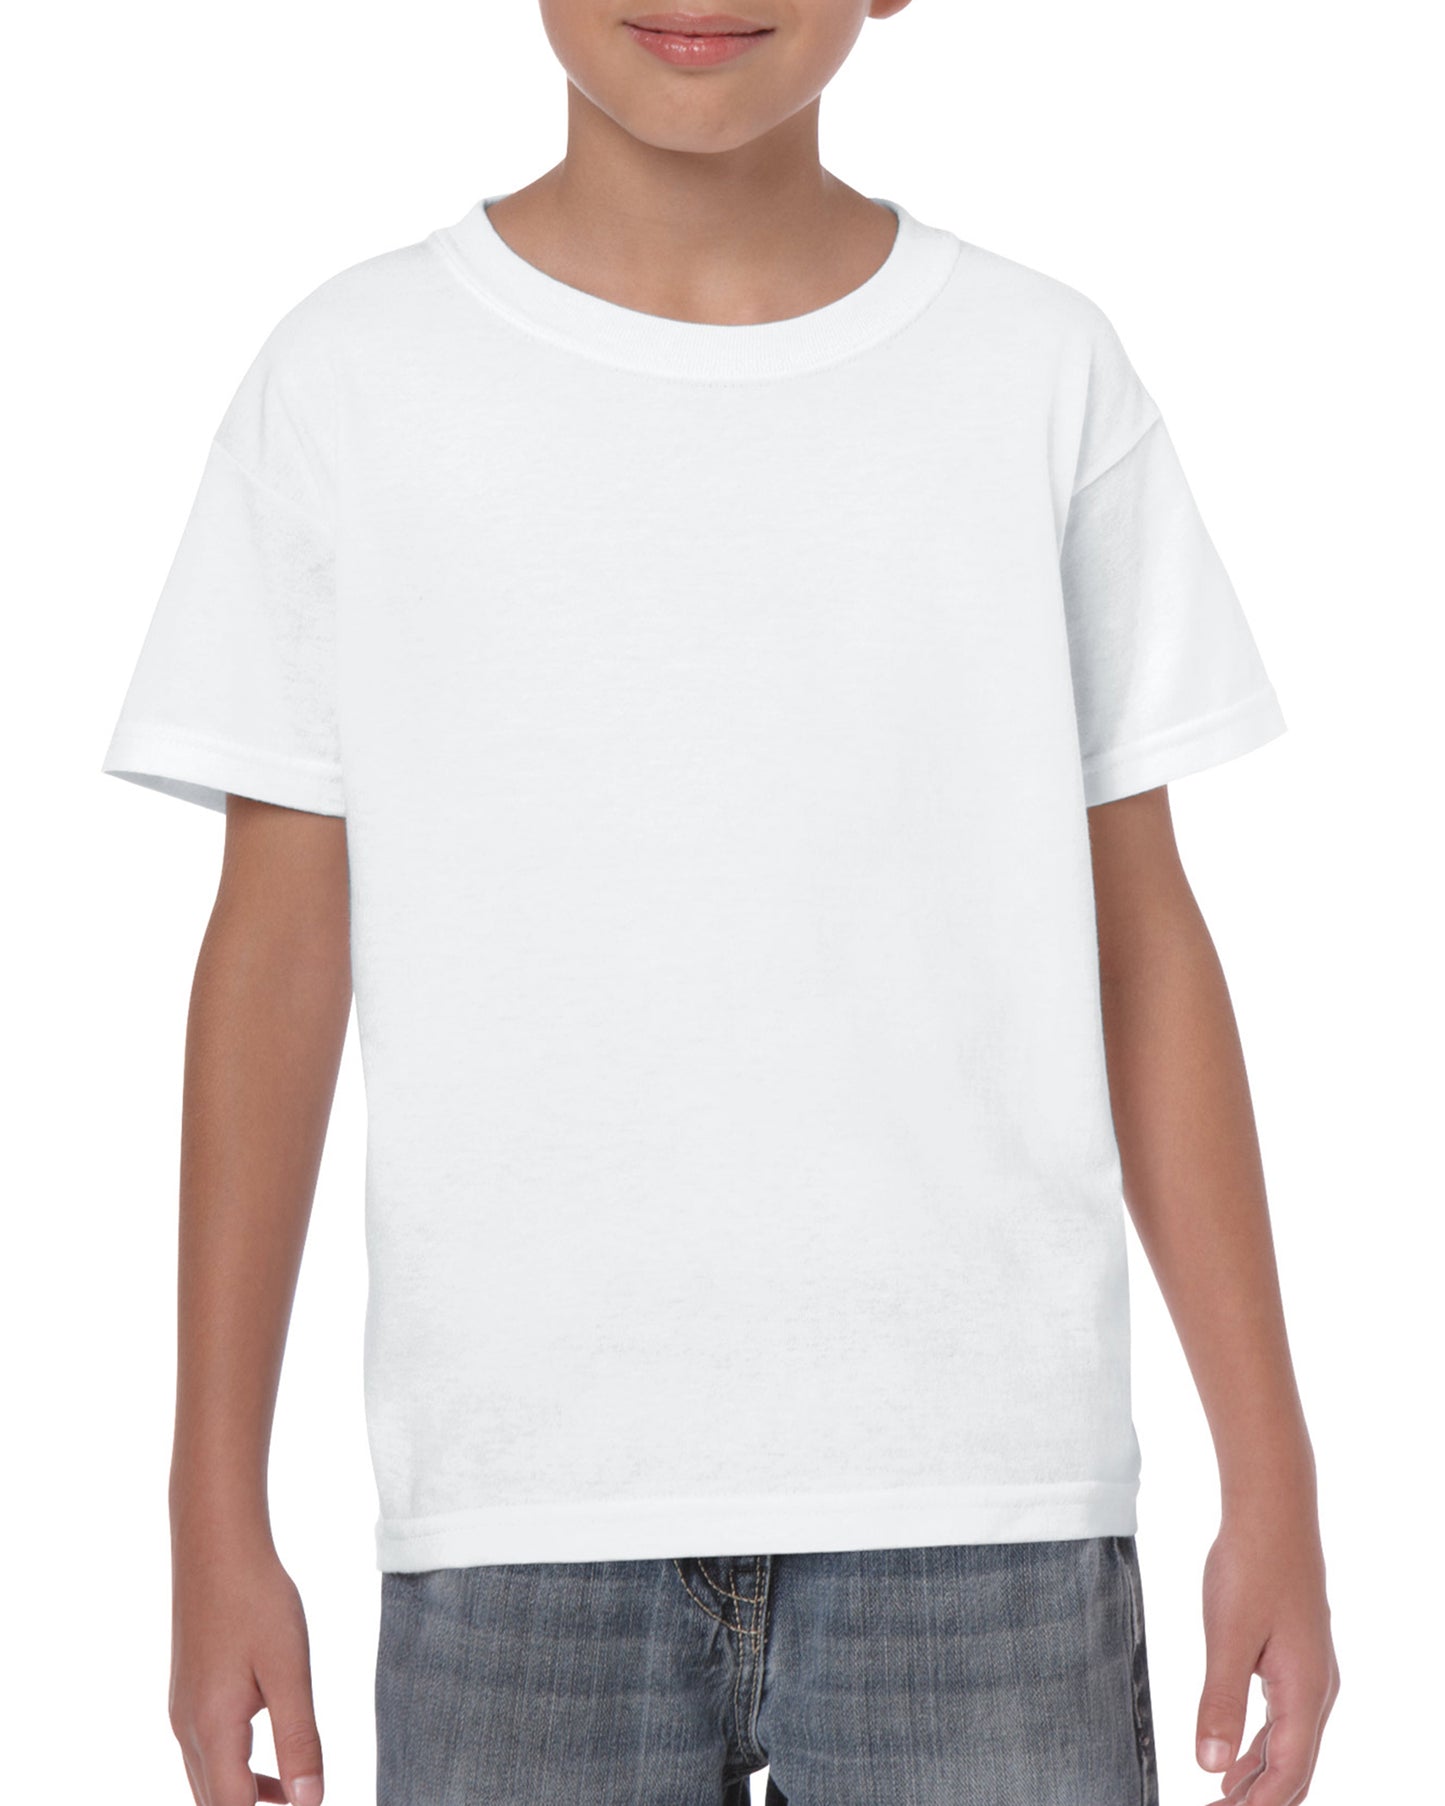 Youth Heavy Cotton Tees